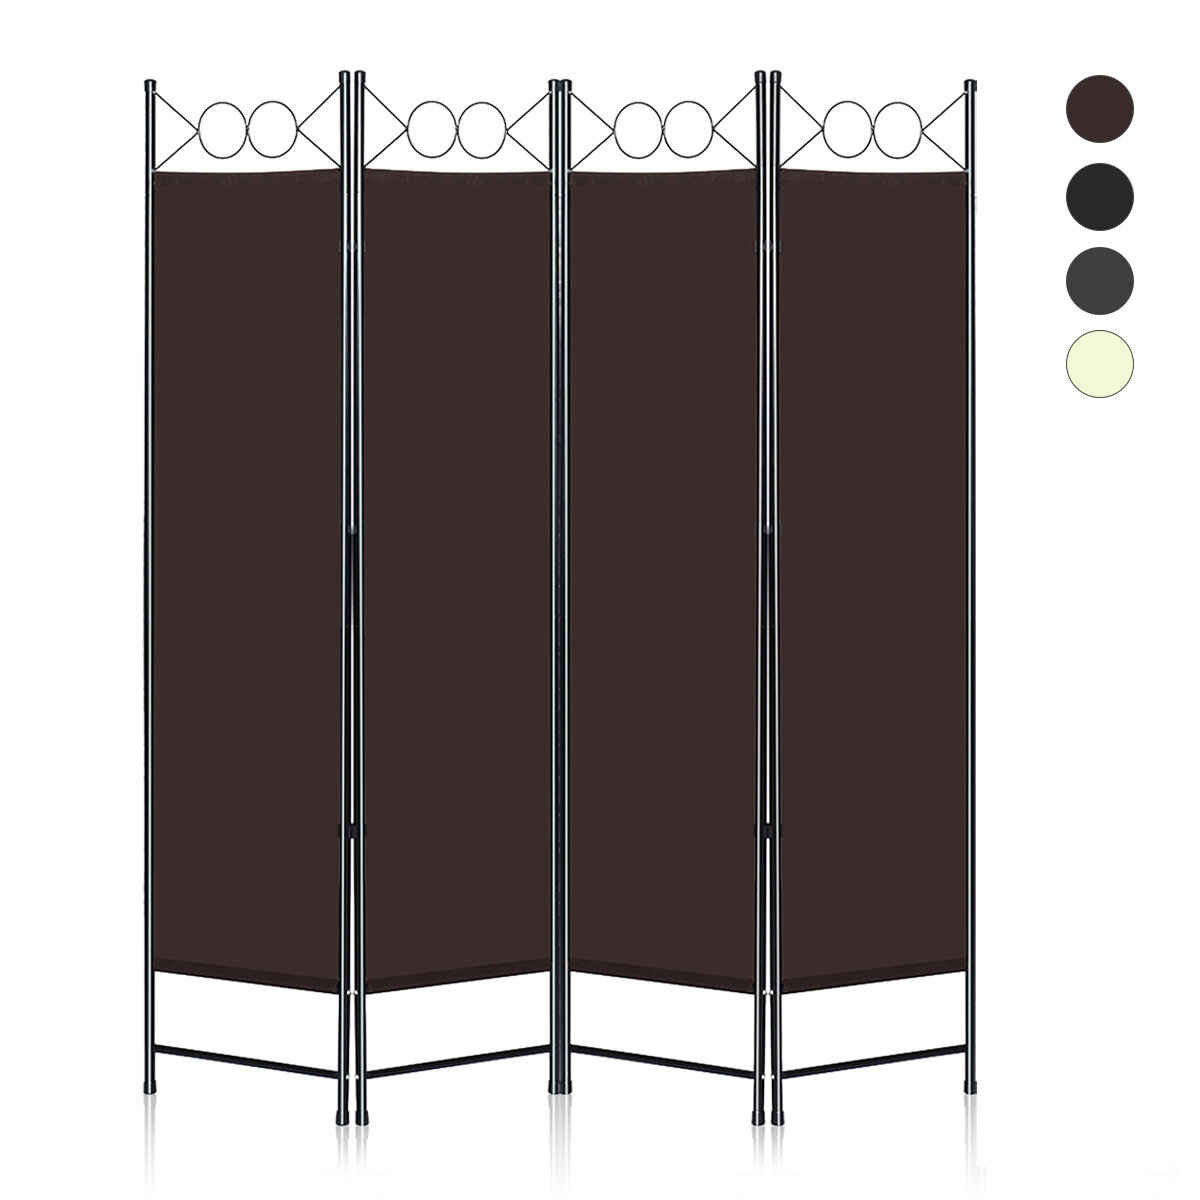 Snailhome 6ft 4-Panel Vintage Home Folding Room Divider Screen Partition Separator Privace Screen